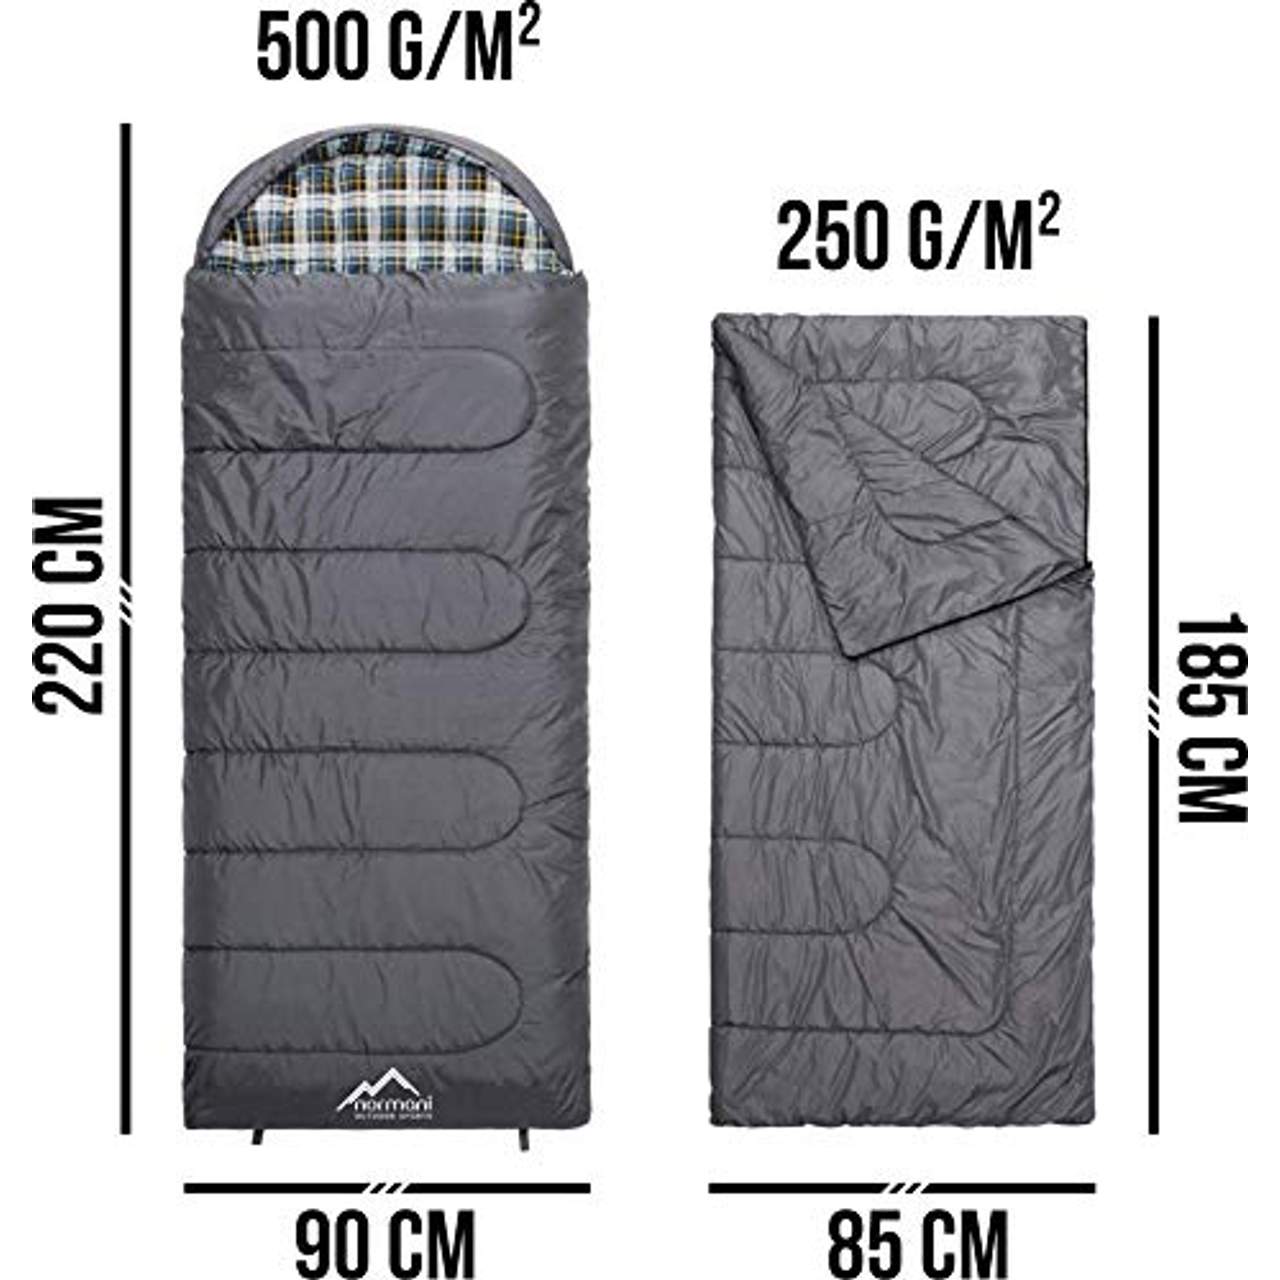 normani 4-in-1-Funktion Extrem Outdoor Schlafsack 'Antarctica'